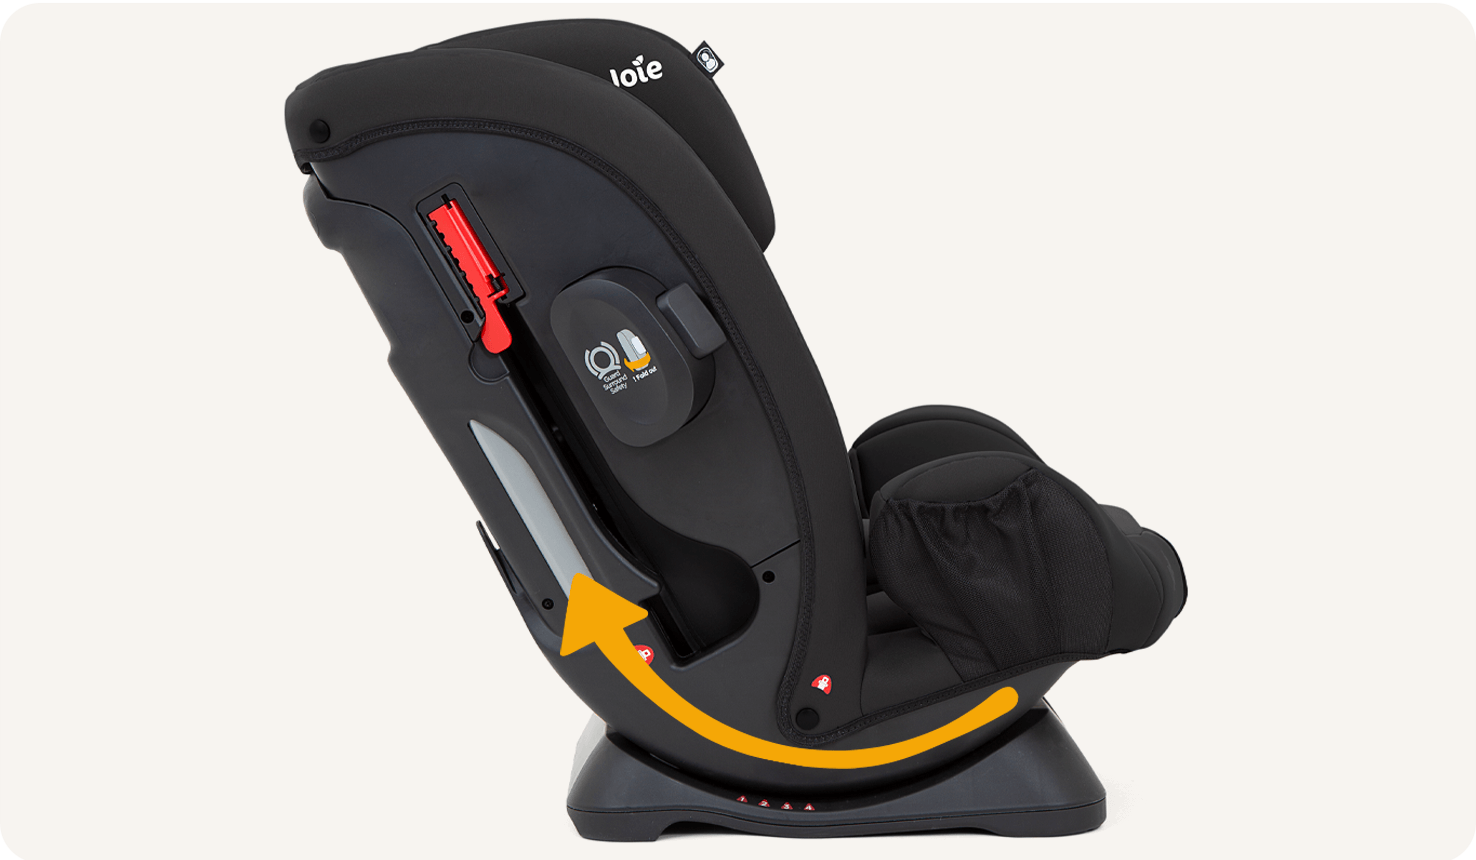 Right profile view of fortifi R child car seat with an arrow along the bottom curve of the seat.